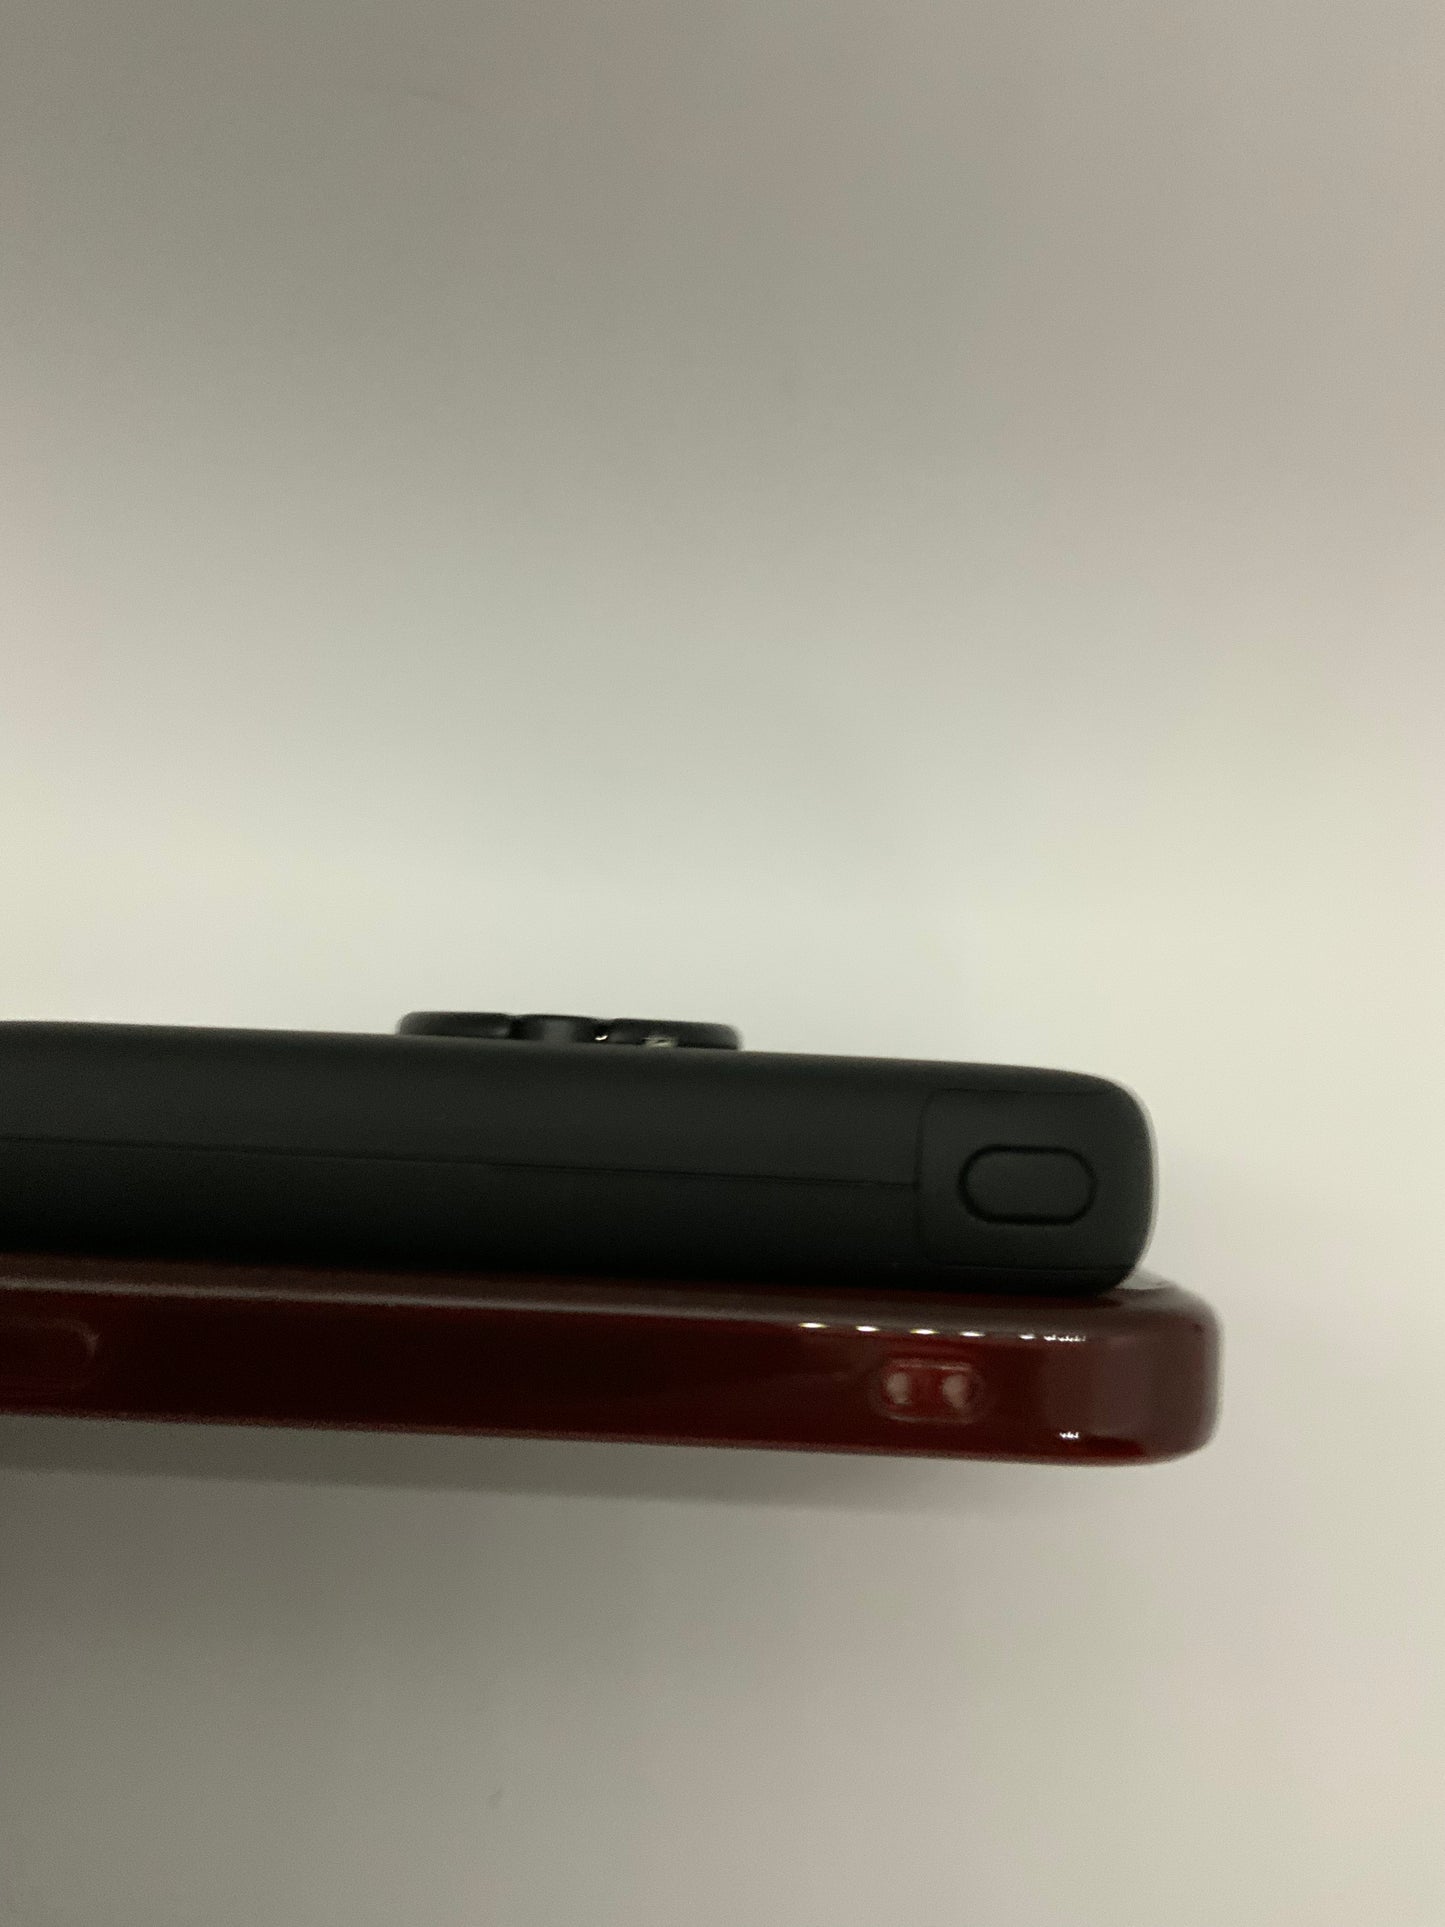 The picture shows two objects that appear to be smartphones or similar devices, stacked on top of each other against a plain light background. The top device is black and has a button on the side. The bottom device is a dark red or maroon color and appears to be slightly thicker than the black one. The bottom device also has a button on the side, and there is a small symbol or logo next to the button. The devices are shown from the side, and the focus is on the edges of the devices.